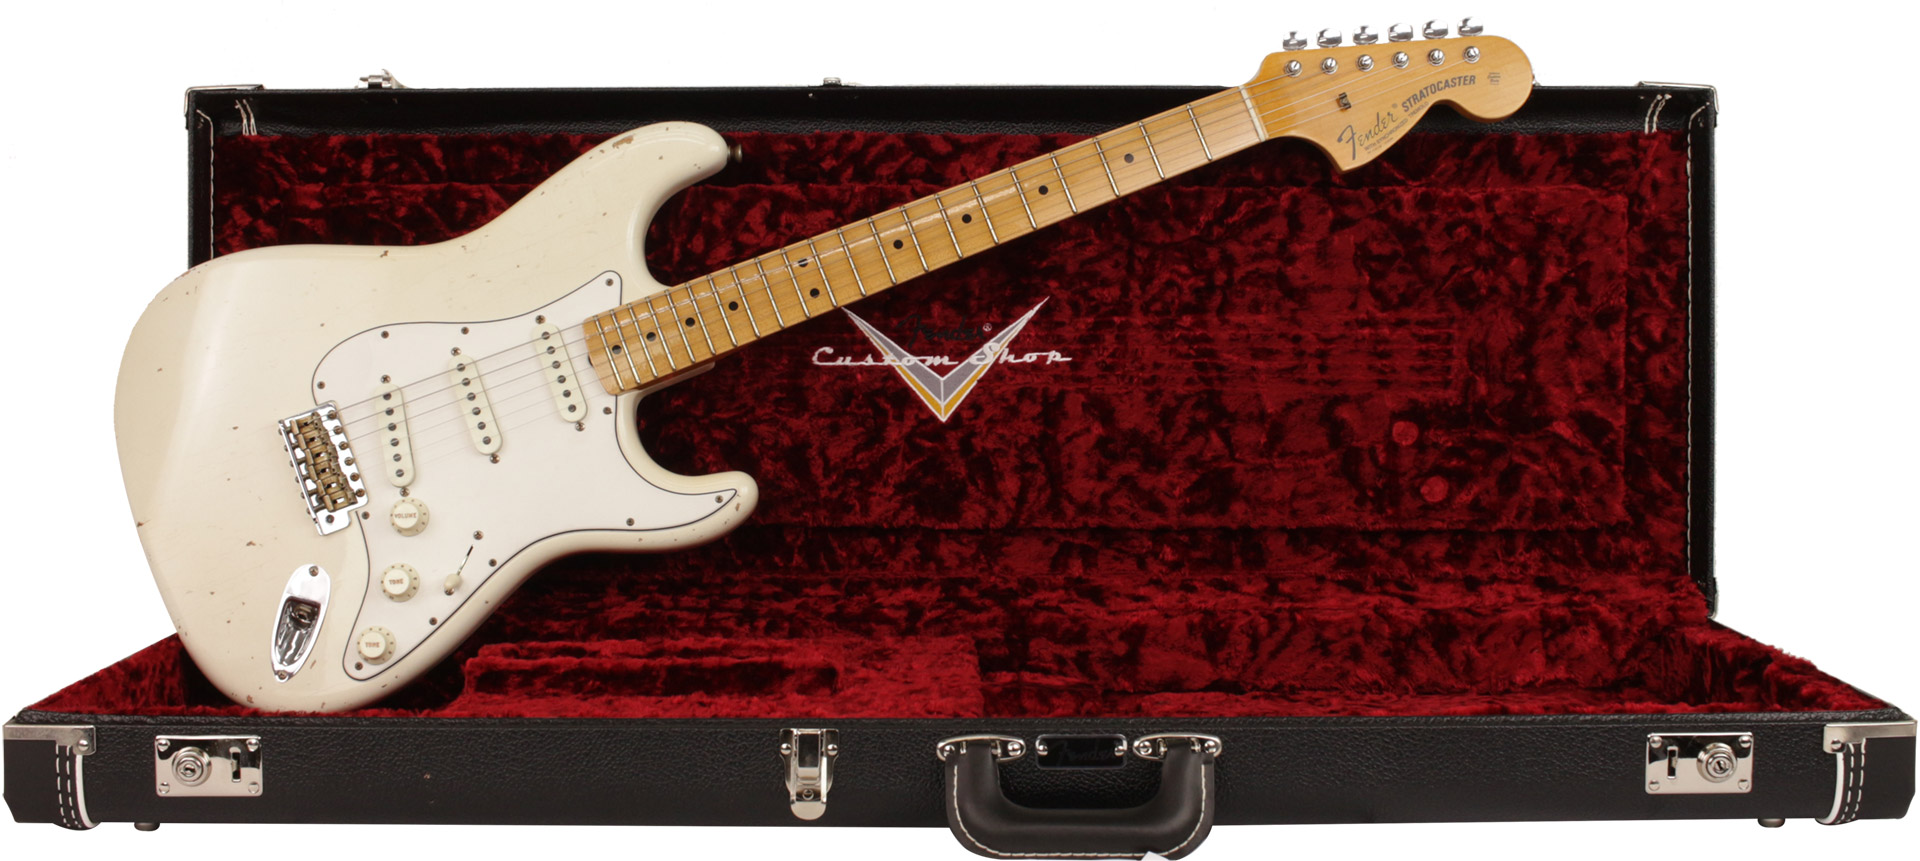 GUITARRA FENDER 68 STRATOCASTER TIME MACHINE RELIC LTD EDITION 923-5000-517 AGED OLYMPIC WHIT